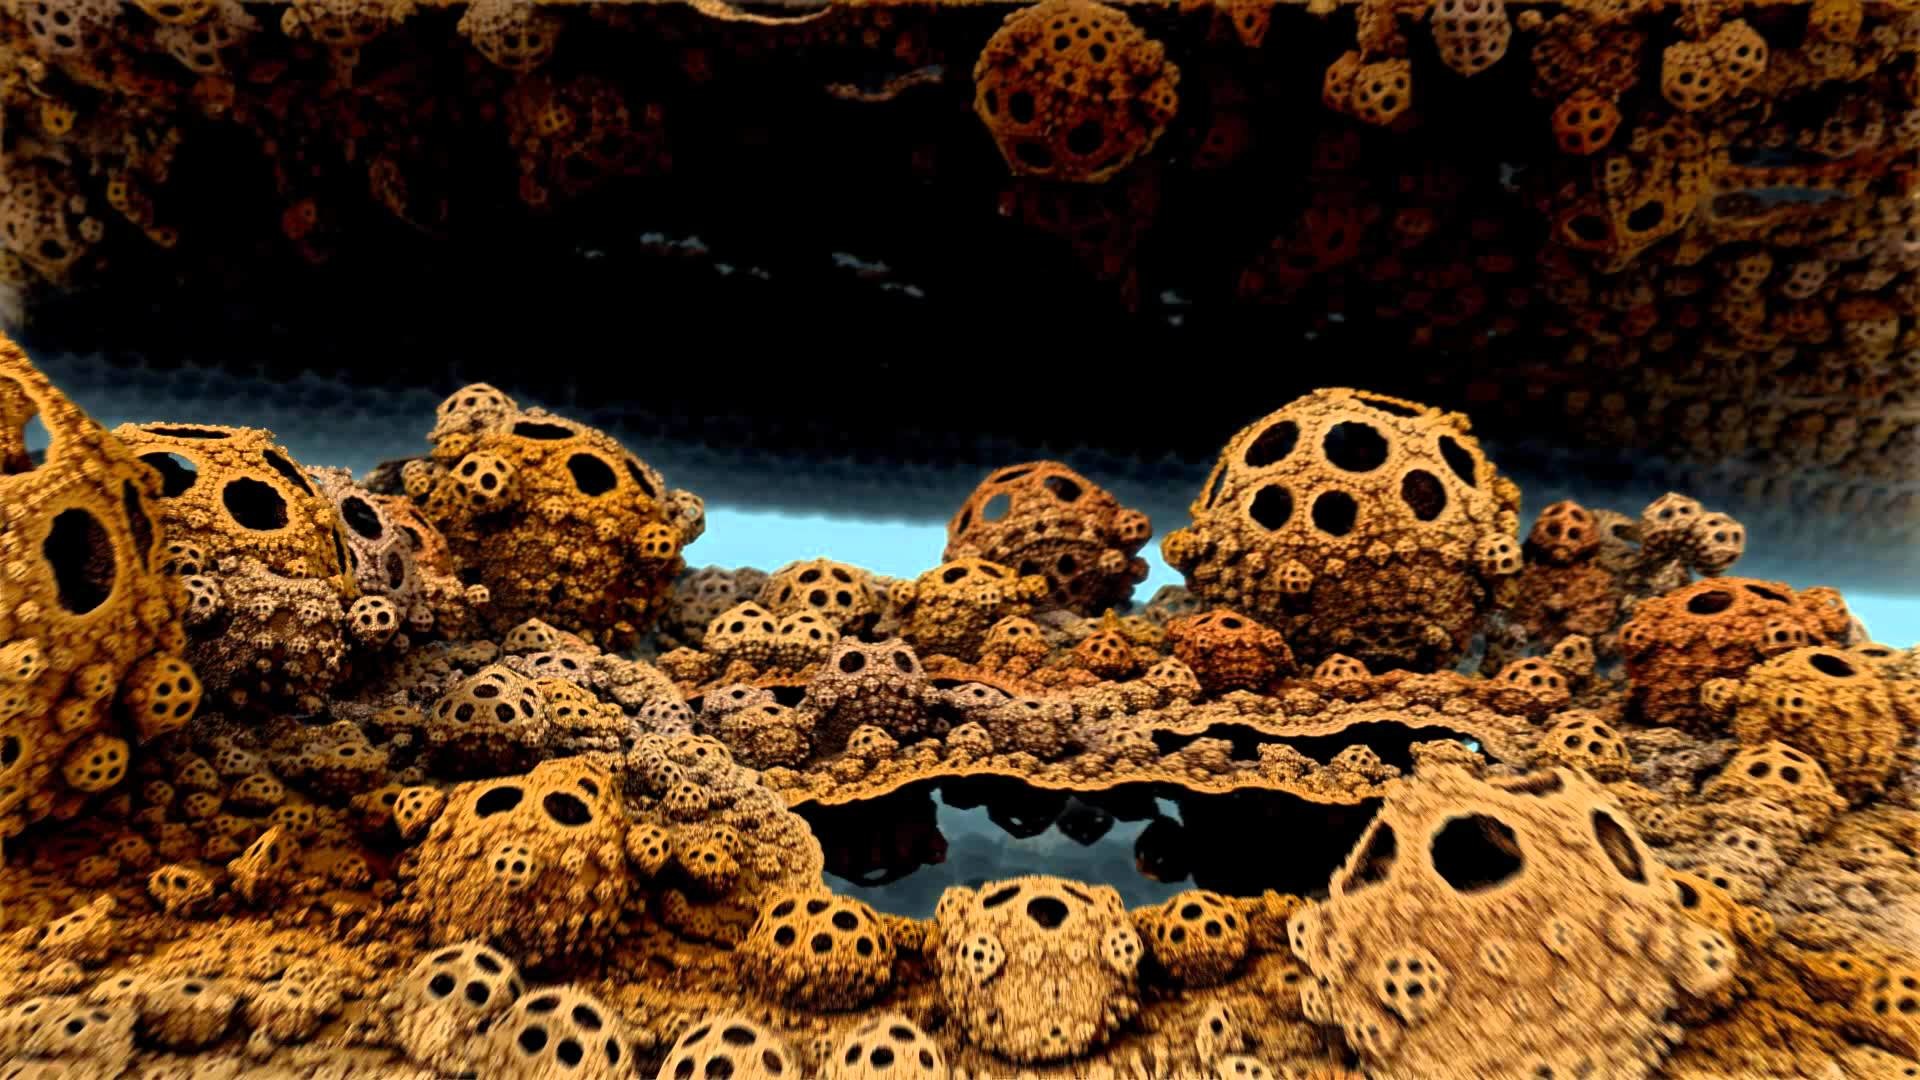 1920x1080 3D fractal animation. Listen to Nightmare Syndicate's "Room 47" during.